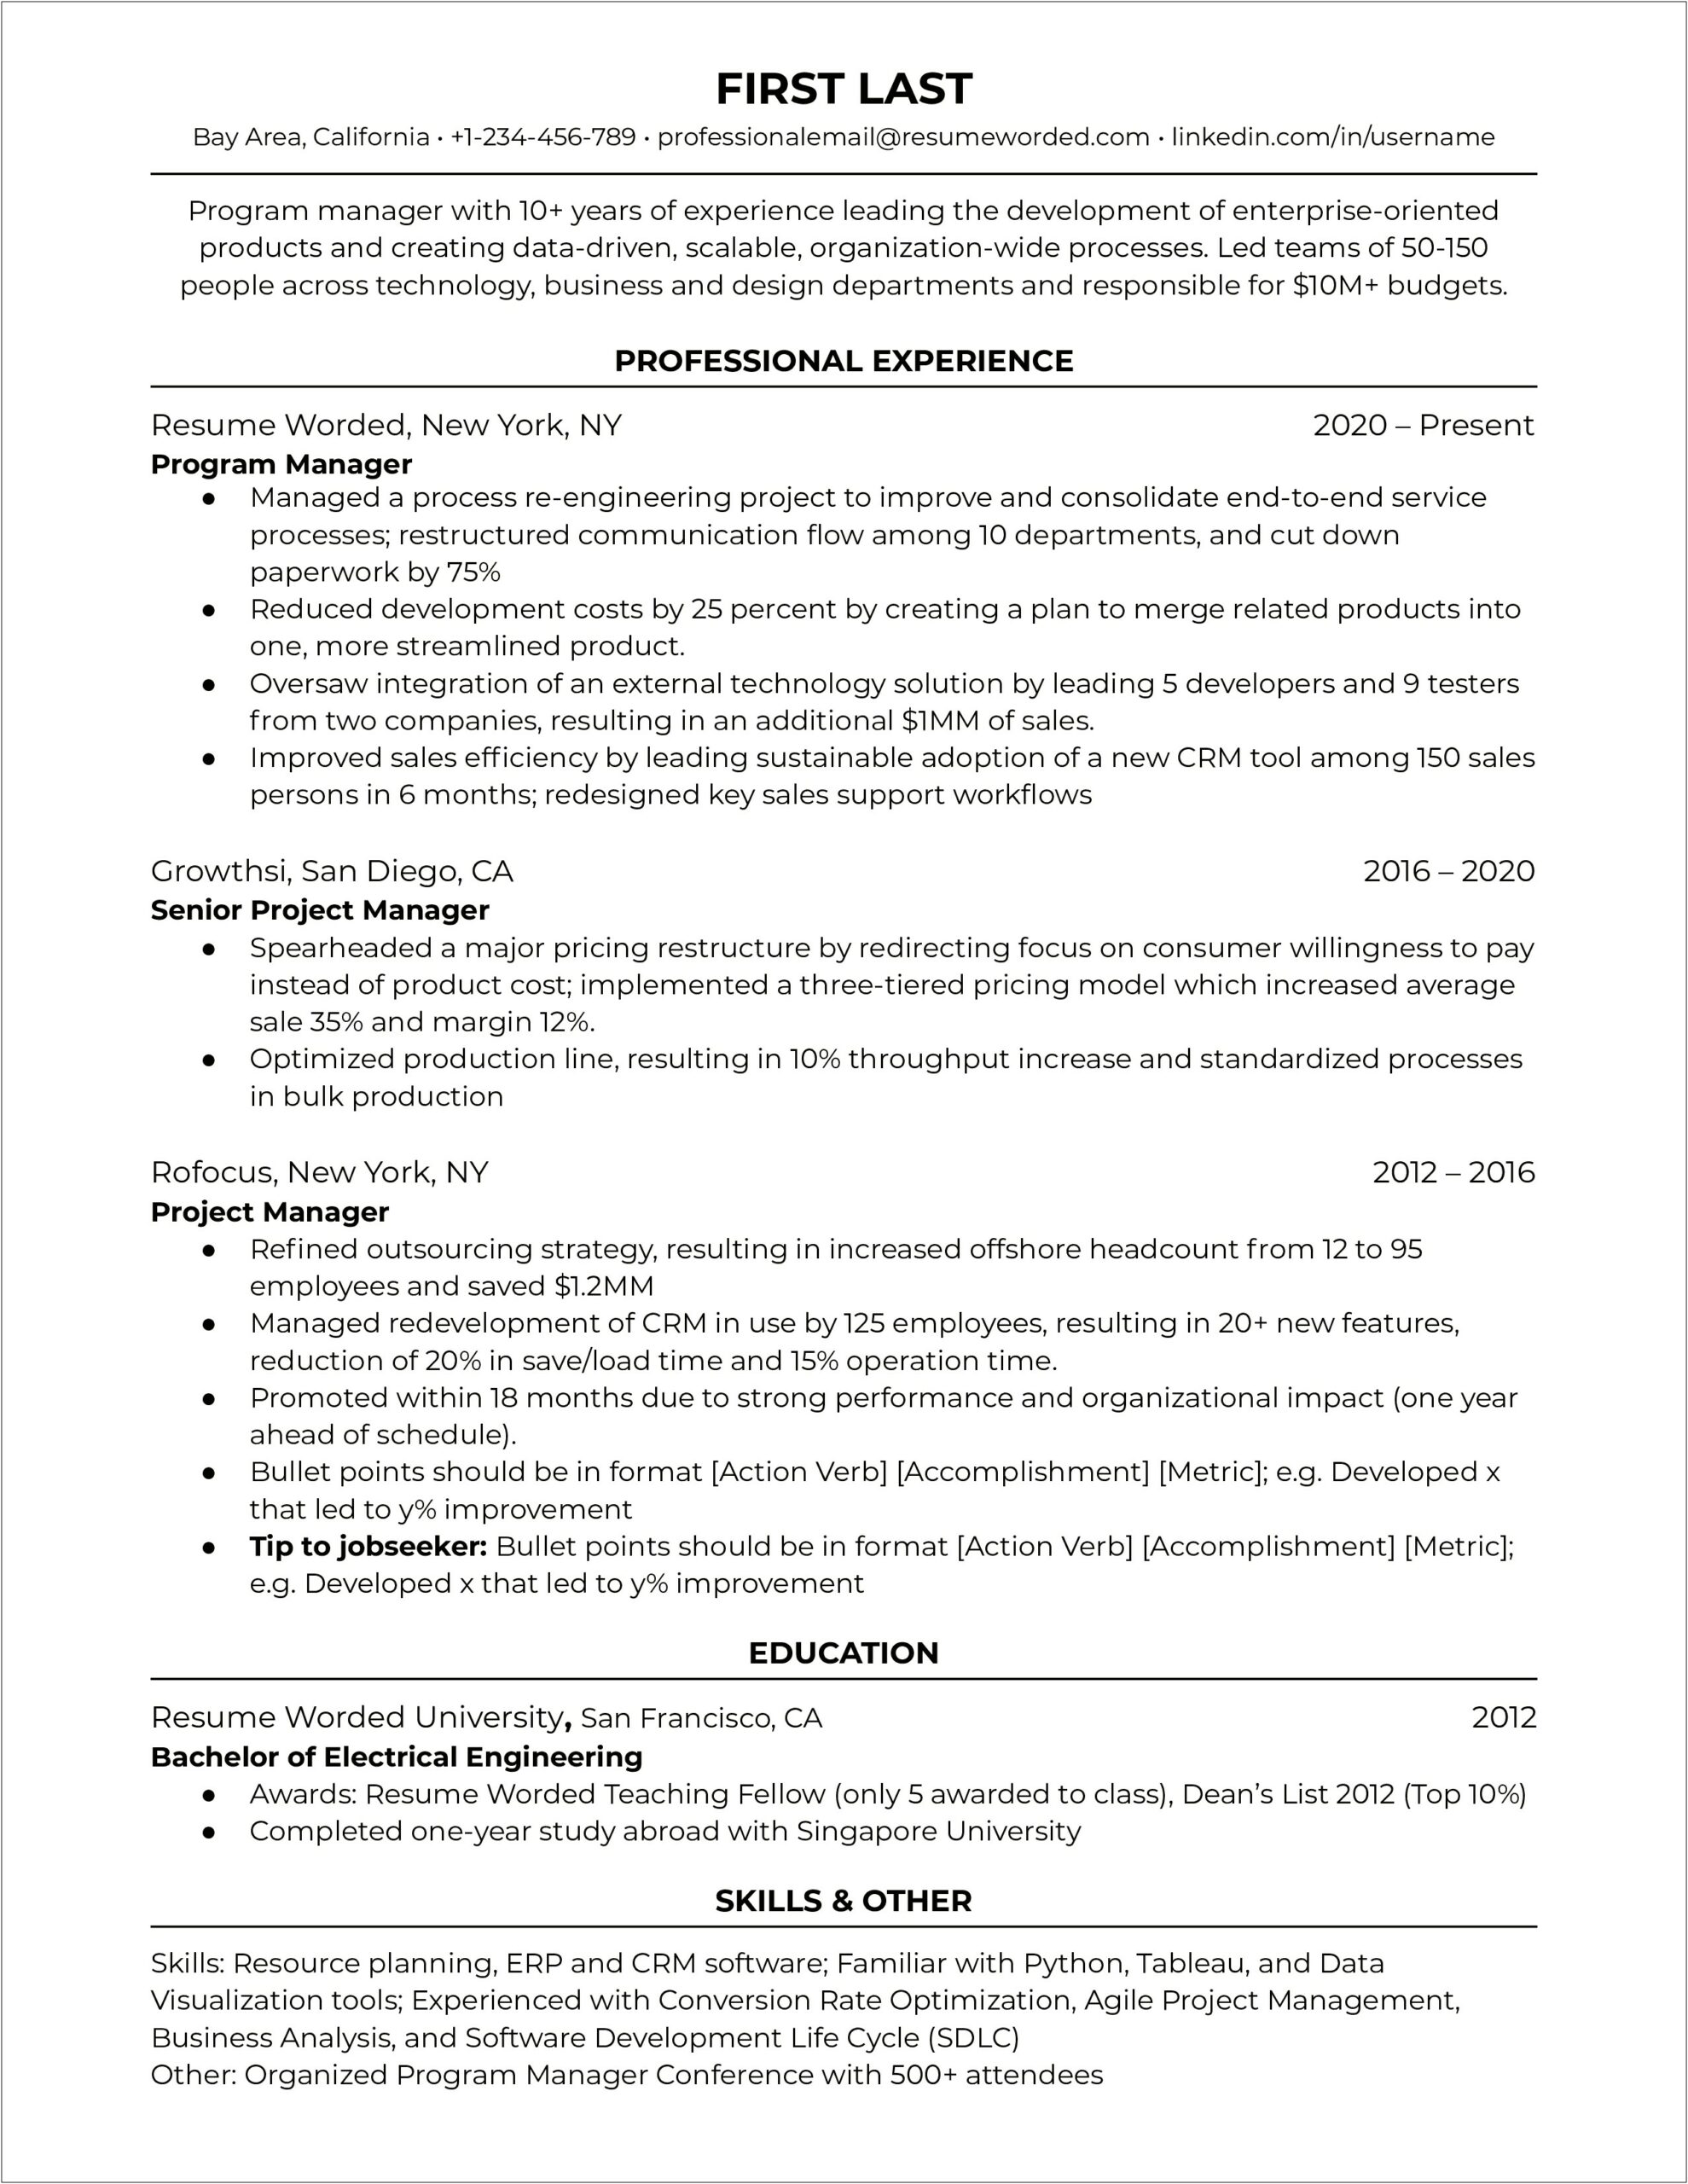 Explain Project Management Experience In Resume